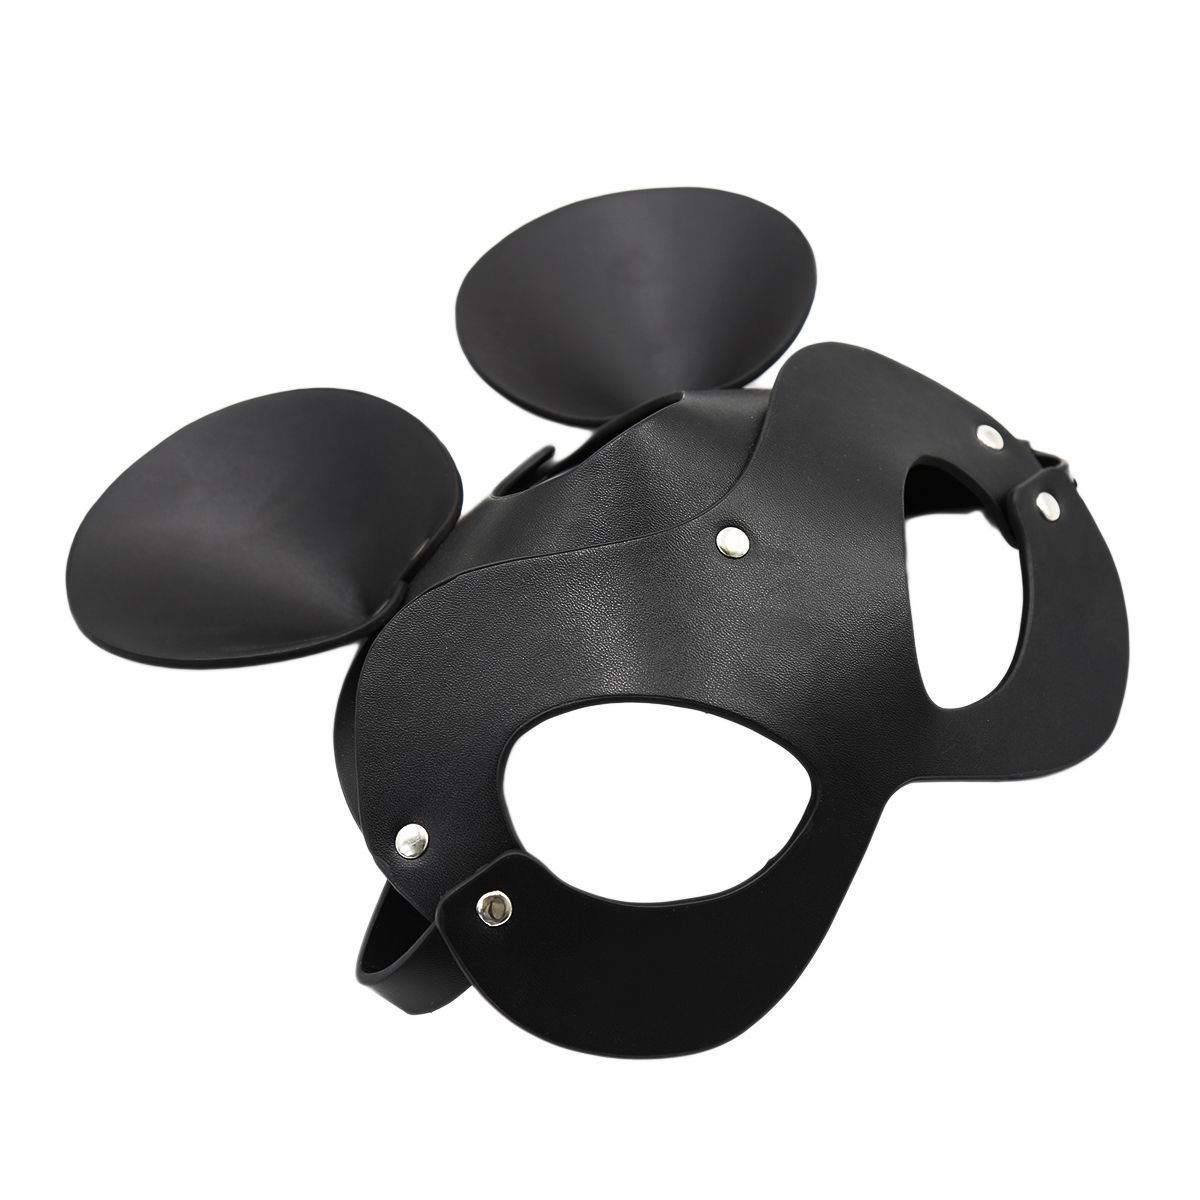 Faux leather mask “Mouse”